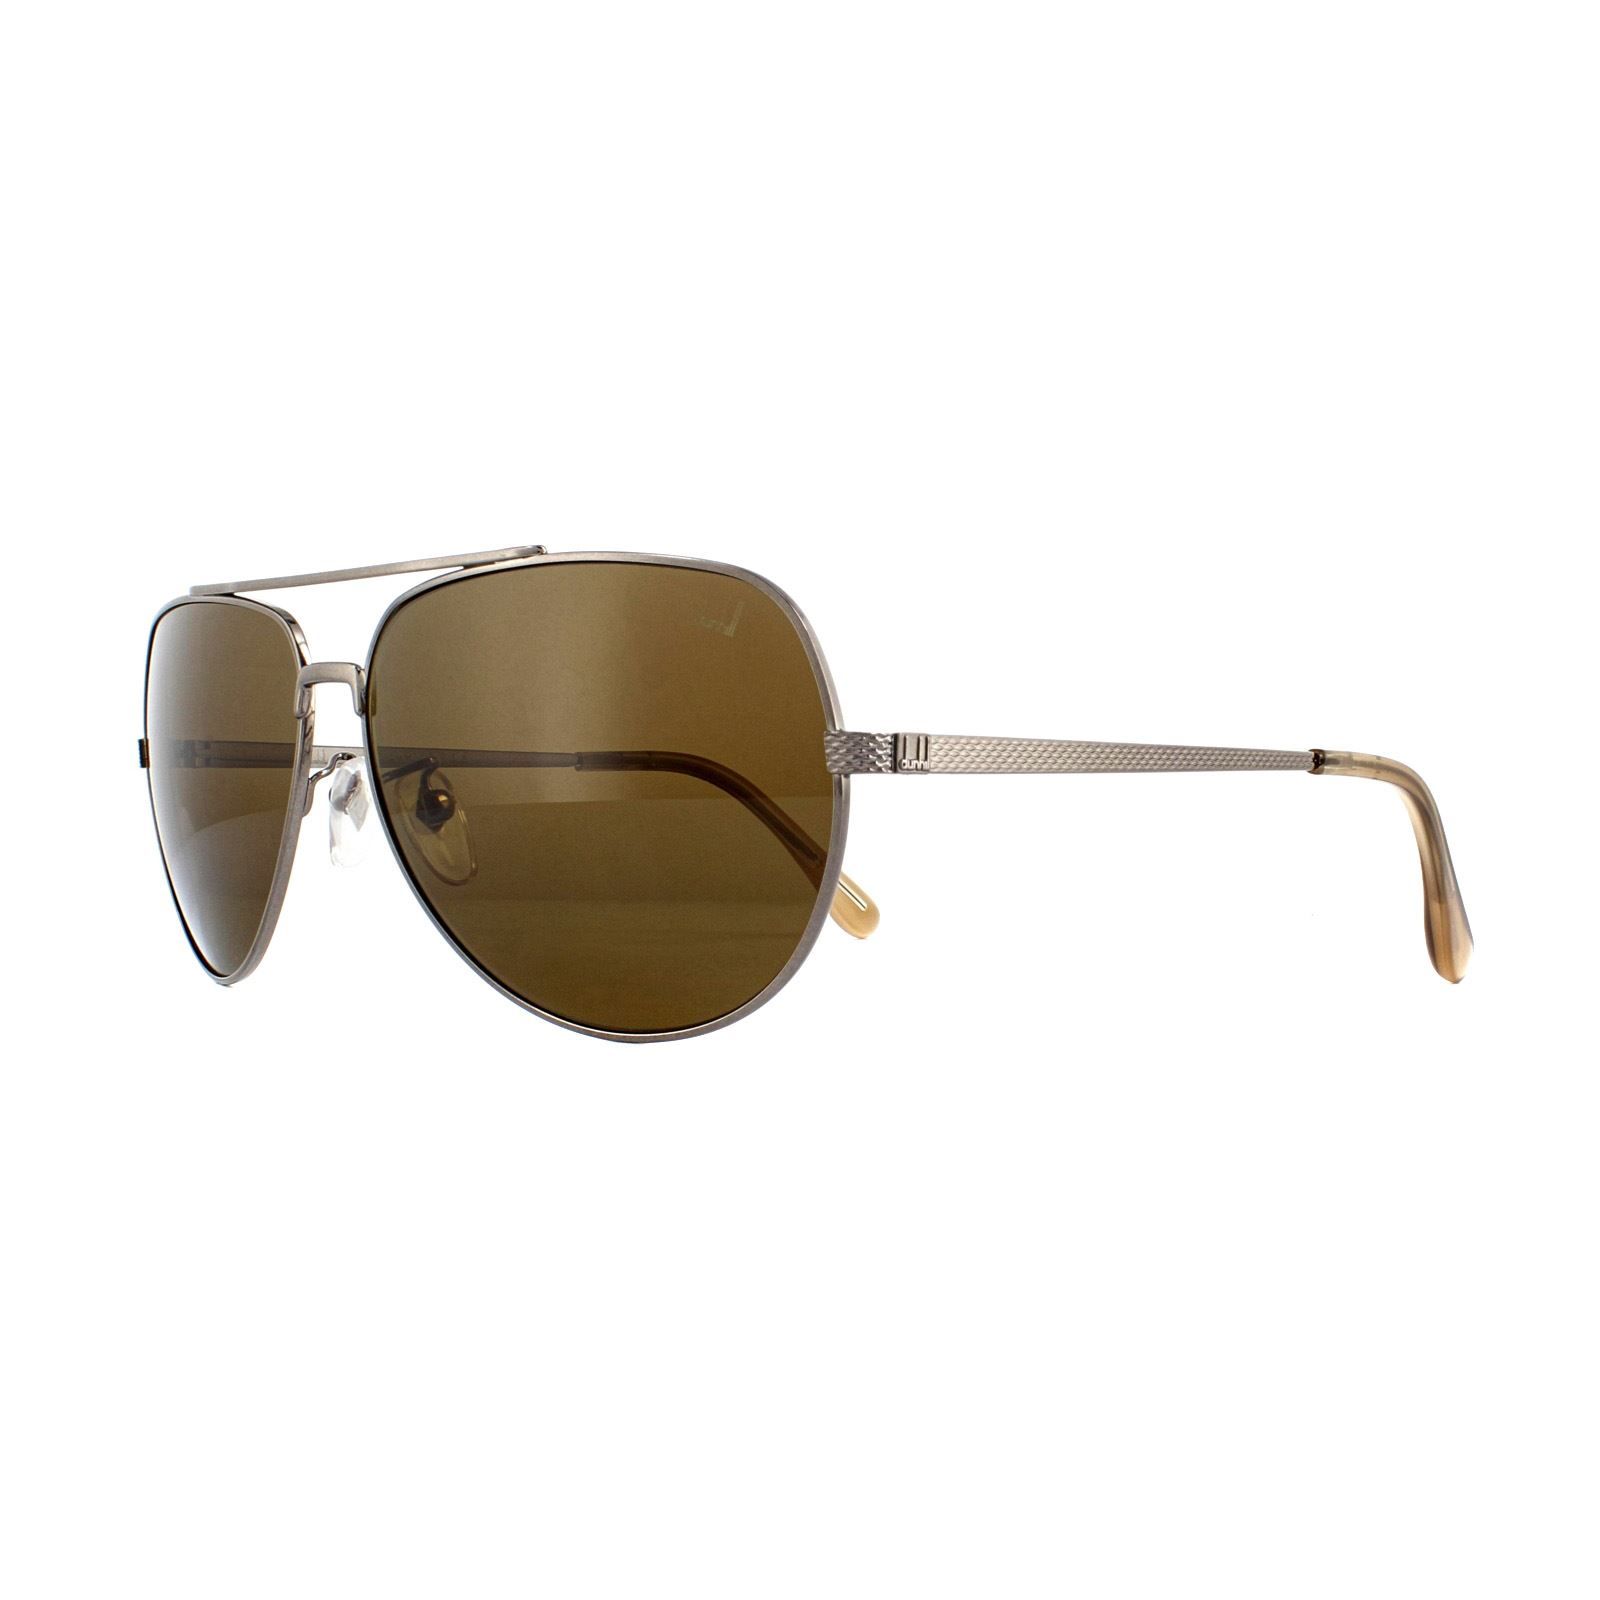 Dunhill Sunglasses SDH007 509P Shiny Gunmetal Brown Polarized are a classic aviator style with textured patterned arms and matching top brow bar for a stylish unique finish.